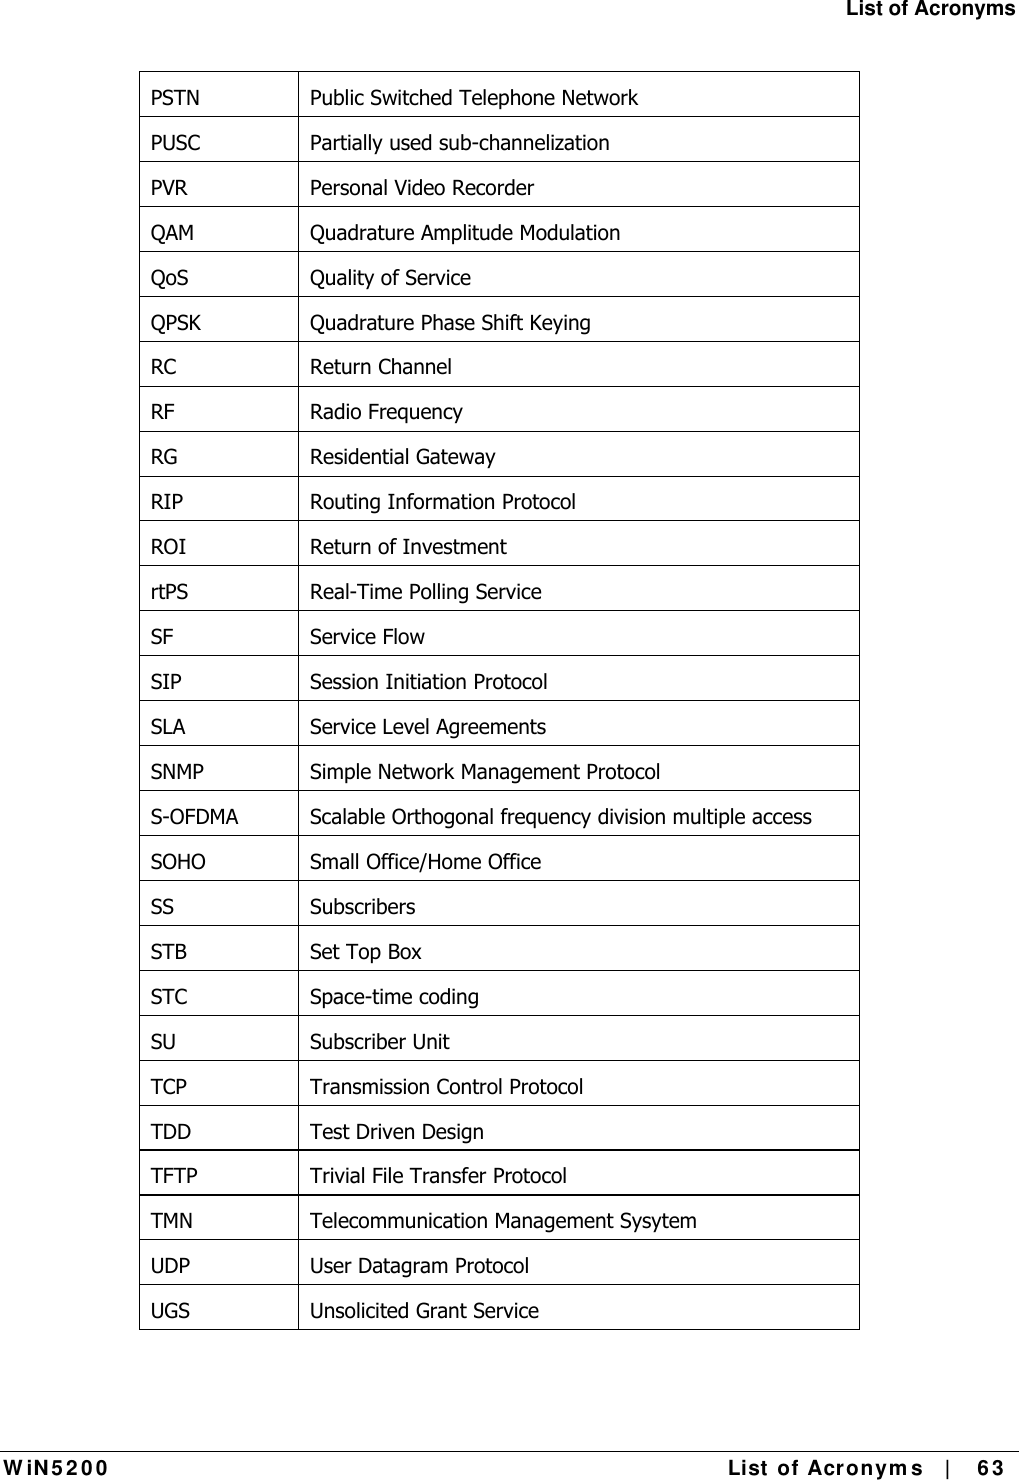 List of Acronyms W iN 5 2 0 0   List  of Acron ym s   |    6 3  PSTN  Public Switched Telephone Network PUSC  Partially used sub-channelization PVR  Personal Video Recorder QAM  Quadrature Amplitude Modulation QoS  Quality of Service QPSK  Quadrature Phase Shift Keying RC Return Channel RF Radio Frequency RG Residential Gateway RIP  Routing Information Protocol ROI Return of Investment rtPS Real-Time Polling Service SF Service Flow SIP Session Initiation Protocol SLA Service Level Agreements SNMP Simple Network Management Protocol S-OFDMA  Scalable Orthogonal frequency division multiple access SOHO  Small Office/Home Office SS Subscribers STB  Set Top Box STC Space-time coding SU Subscriber Unit TCP  Transmission Control Protocol TDD  Test Driven Design TFTP  Trivial File Transfer Protocol TMN Telecommunication Management Sysytem UDP  User Datagram Protocol UGS  Unsolicited Grant Service 